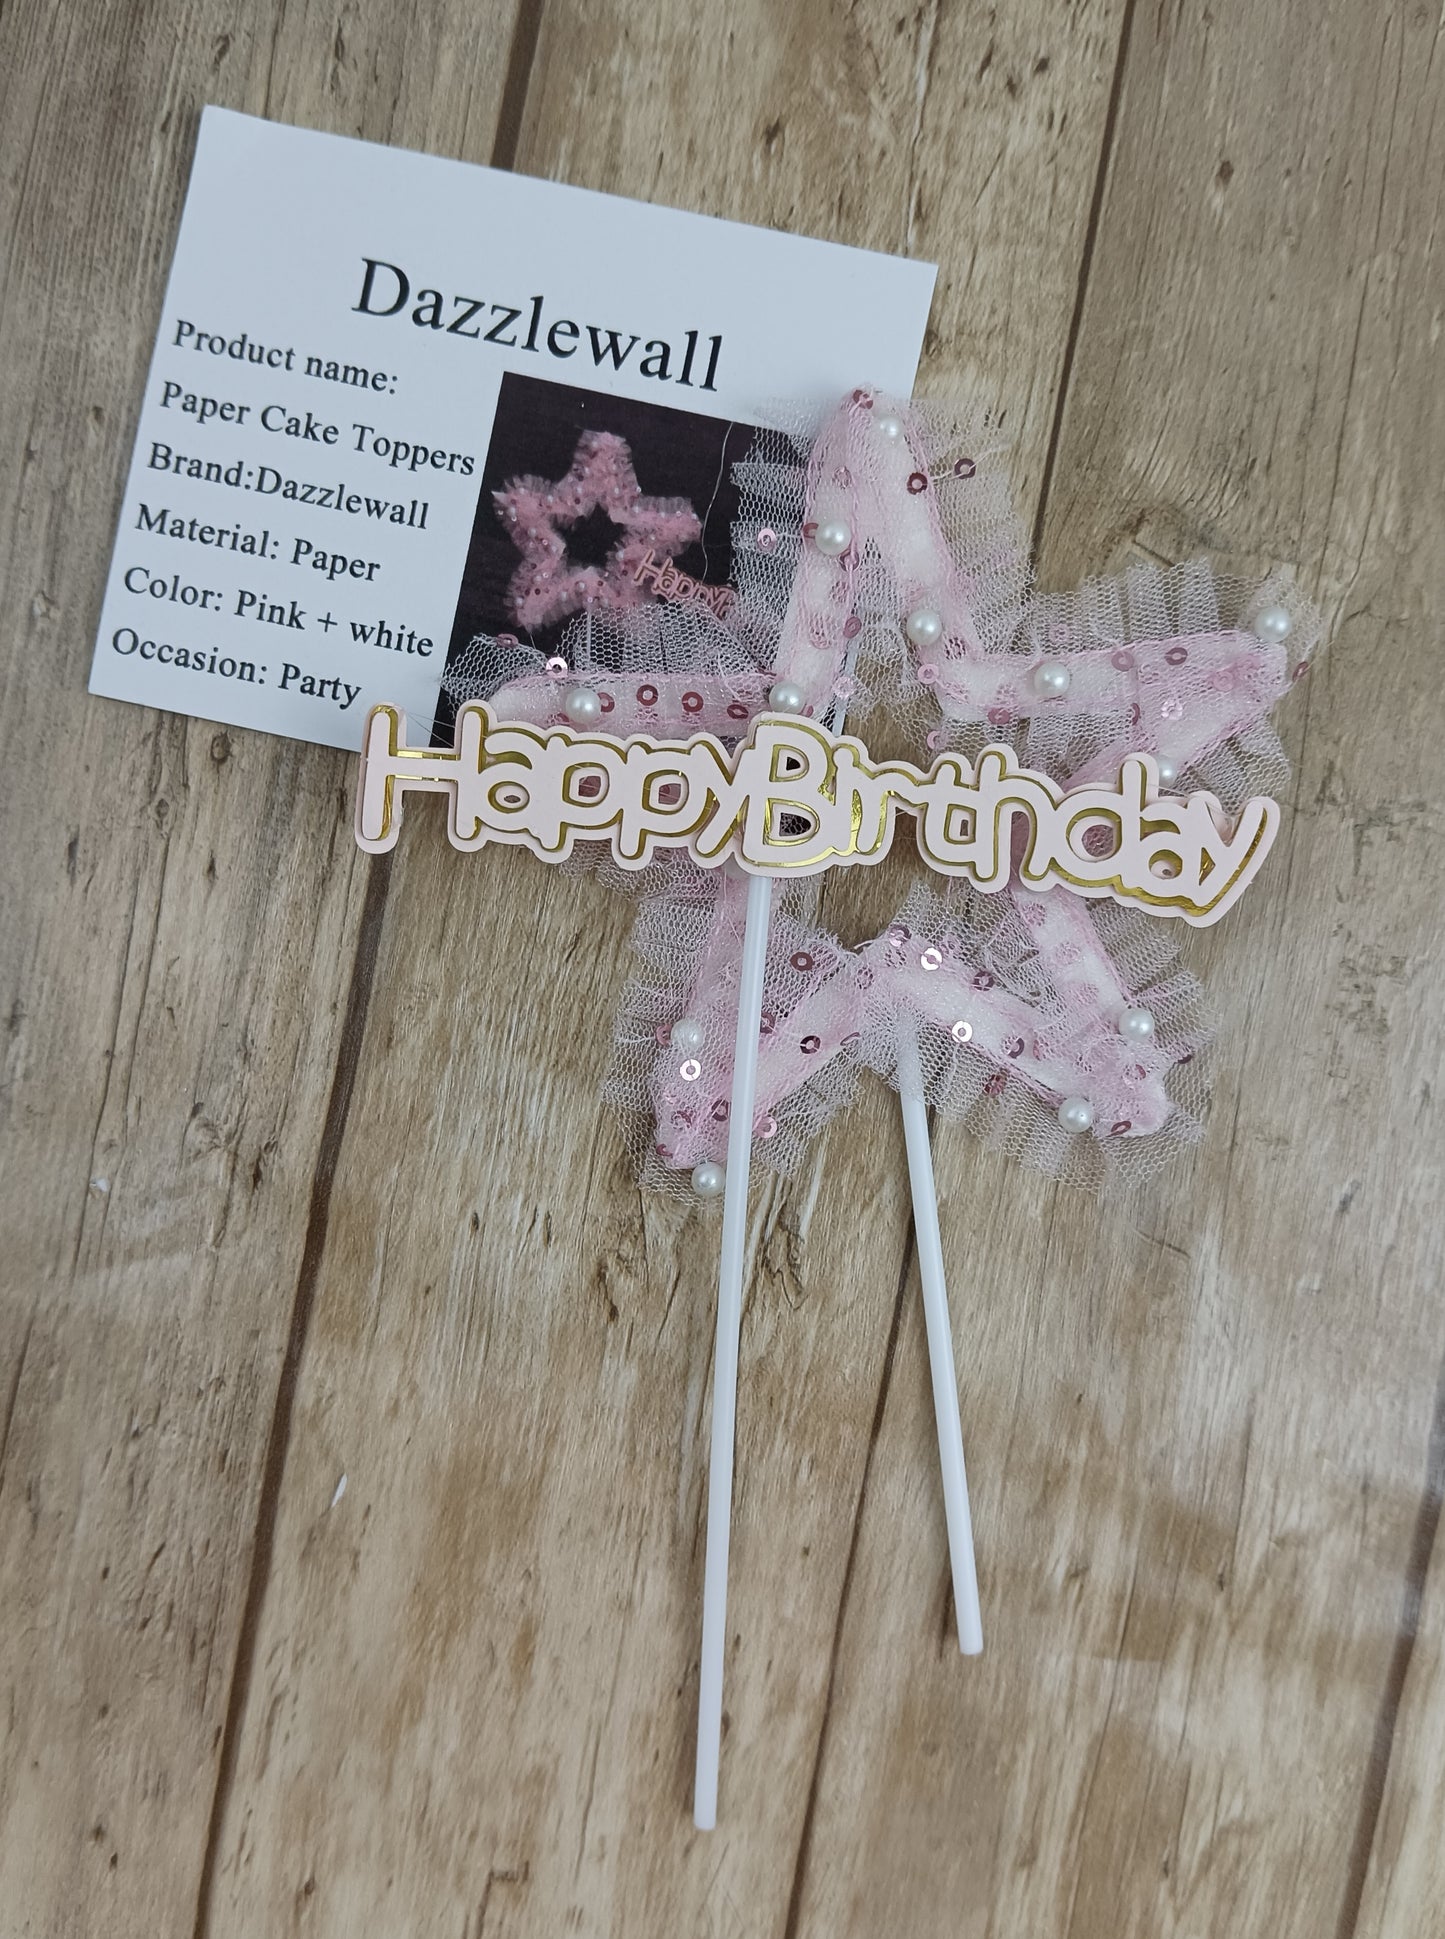 Dazzlewall Paper Cake Toppers Birthday Cake Decorations Party Paper Inserts Cake Paper Decorative Signs Paper Romantic Inserts